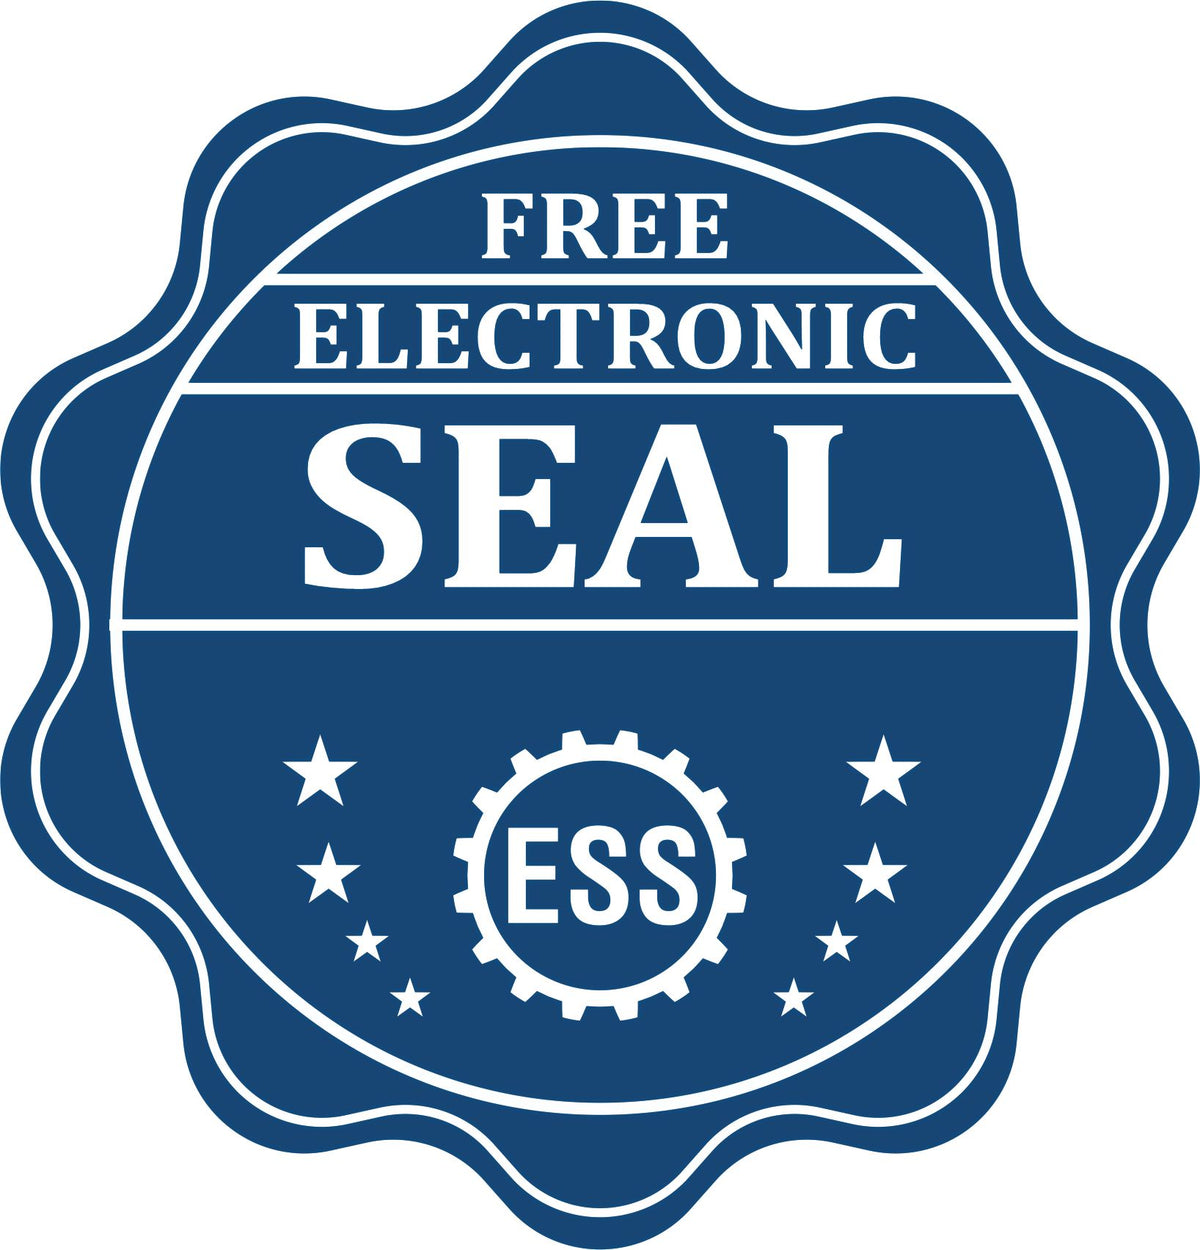 A badge showing a free electronic seal for the Long Reach Montana Land Surveyor Seal with stars and the ESS gear on the emblem.